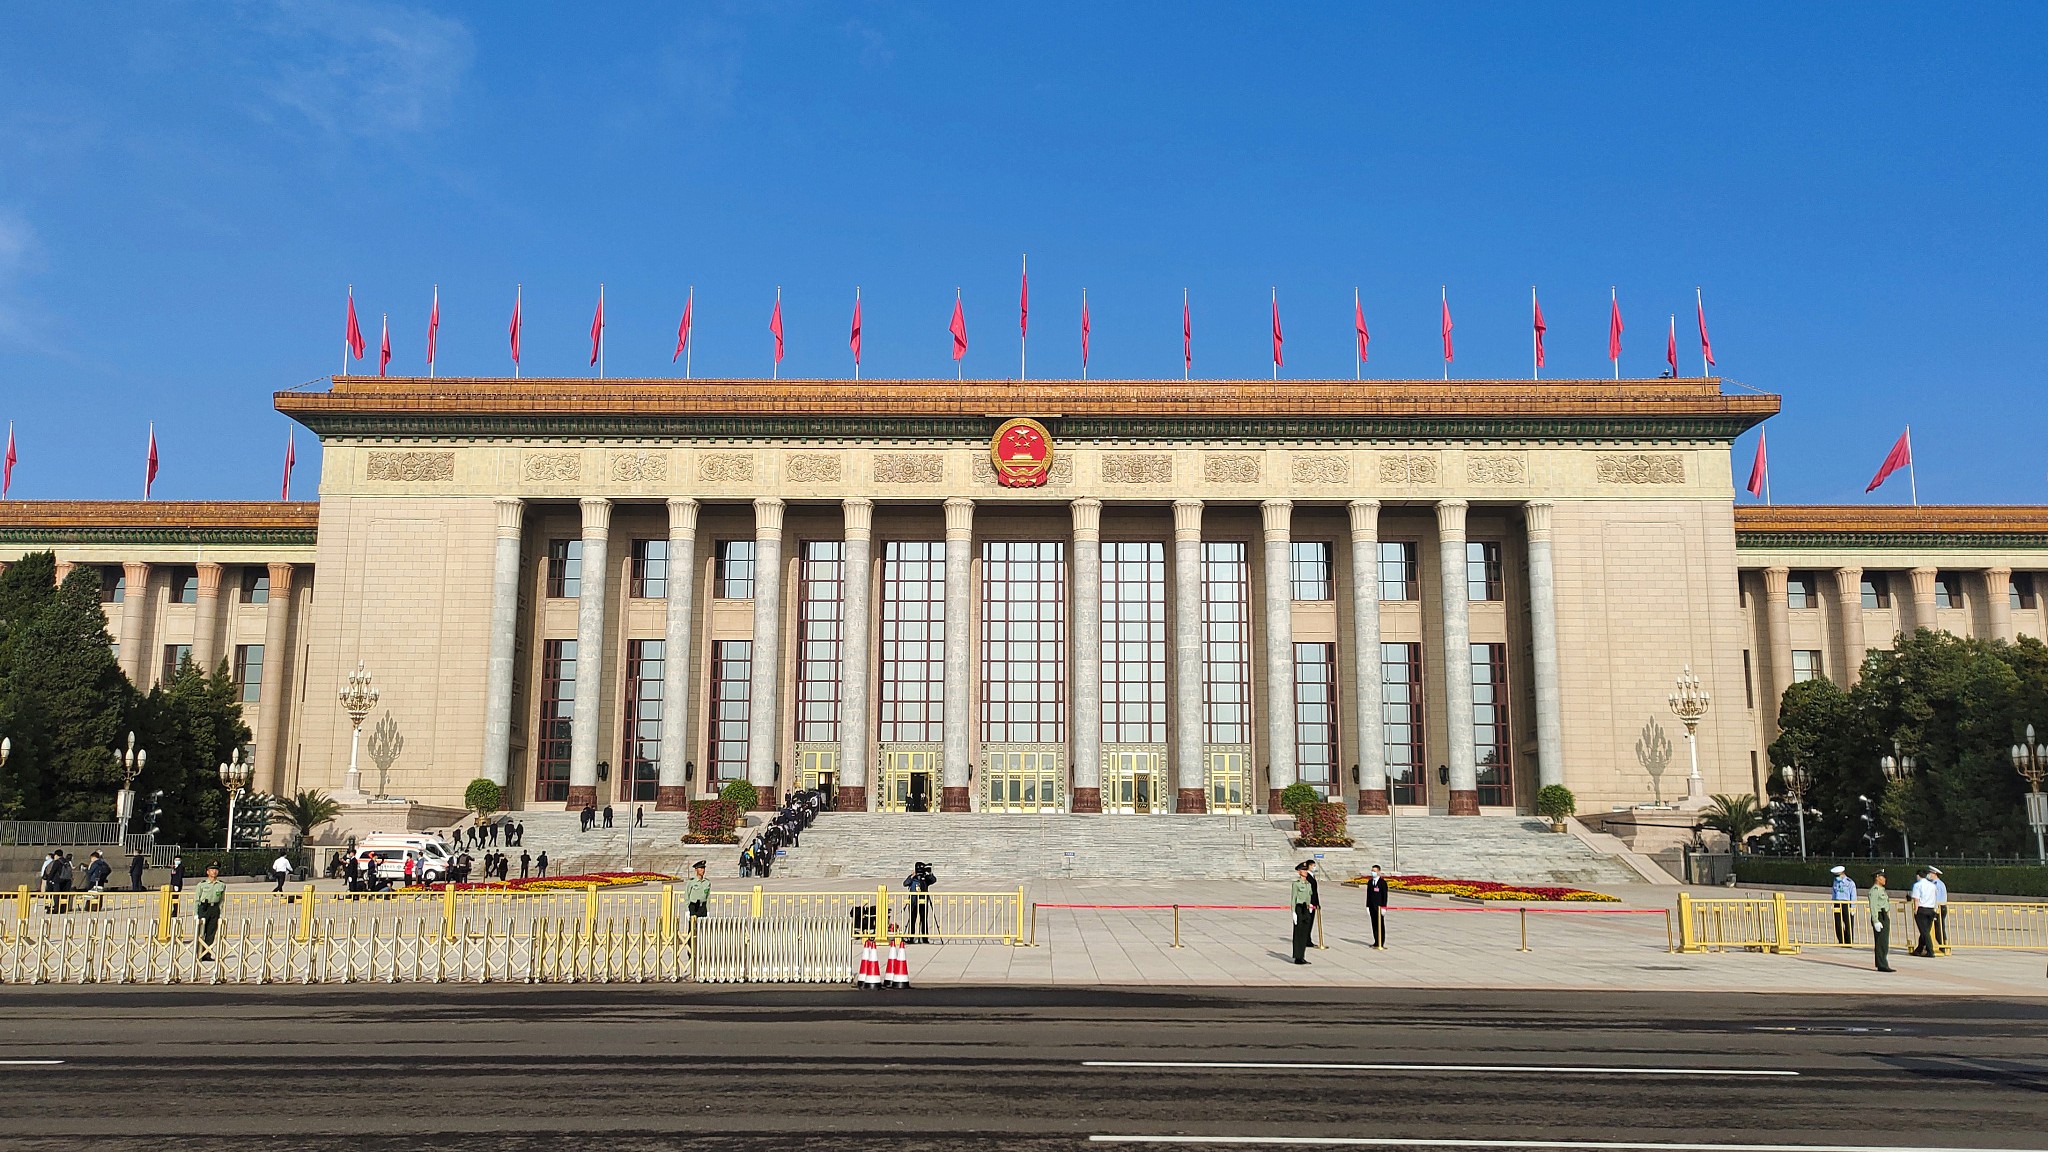 he Great Hall of the People in Beijing, where the Two Sessions take place. /VCG